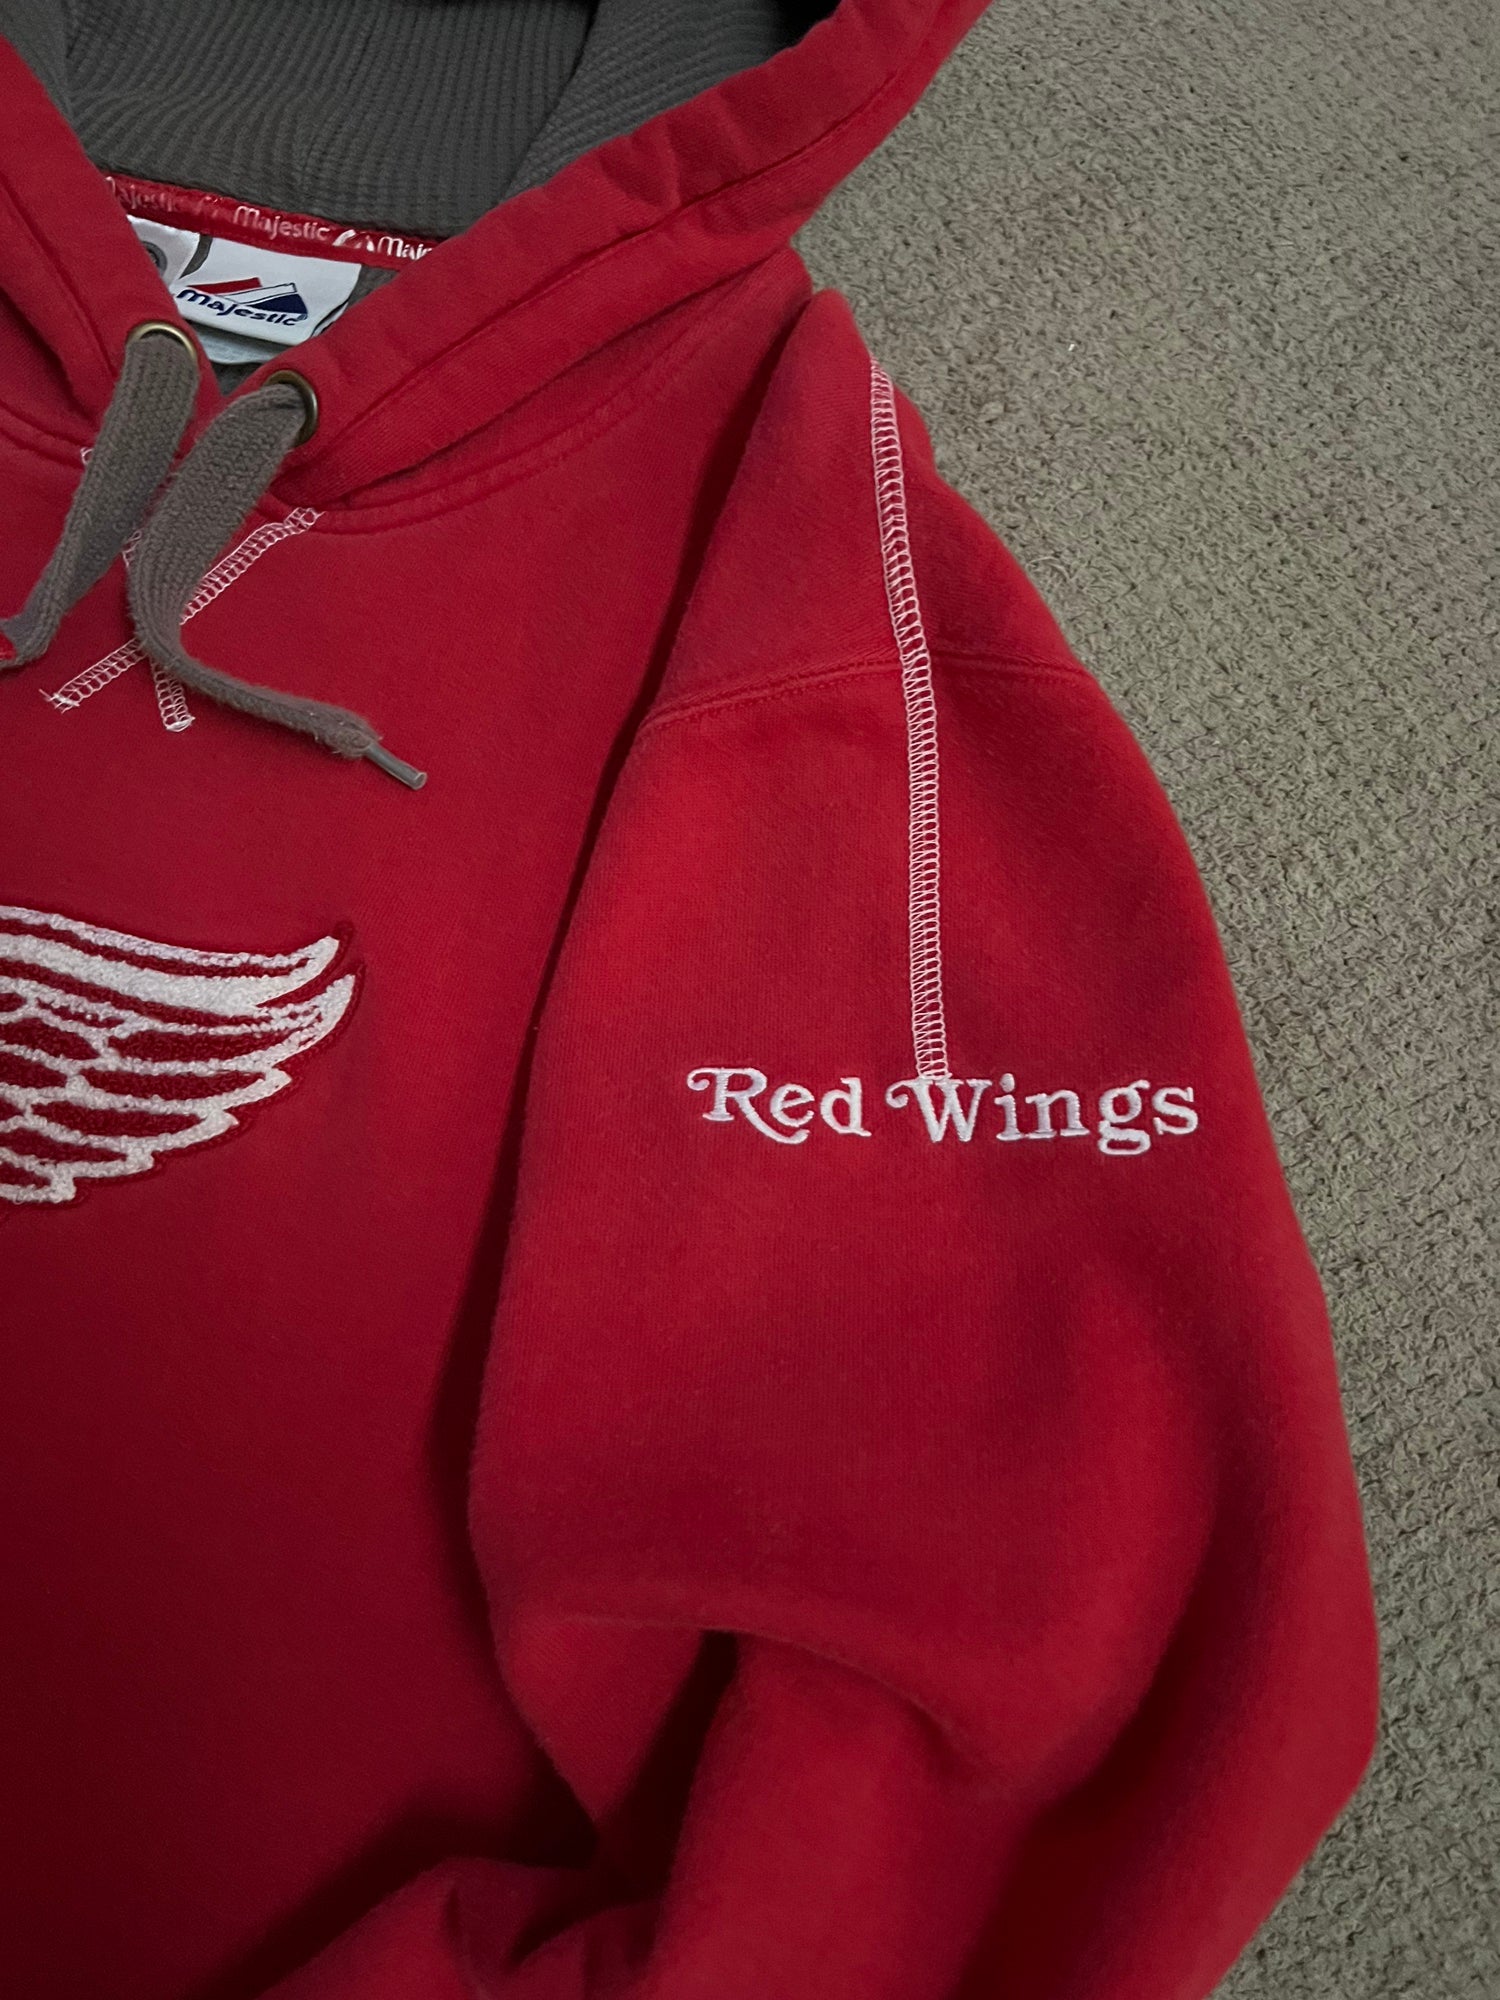 Detroit Red Wings All Over Print 3D Hoodie For Men And Women - Freedomdesign